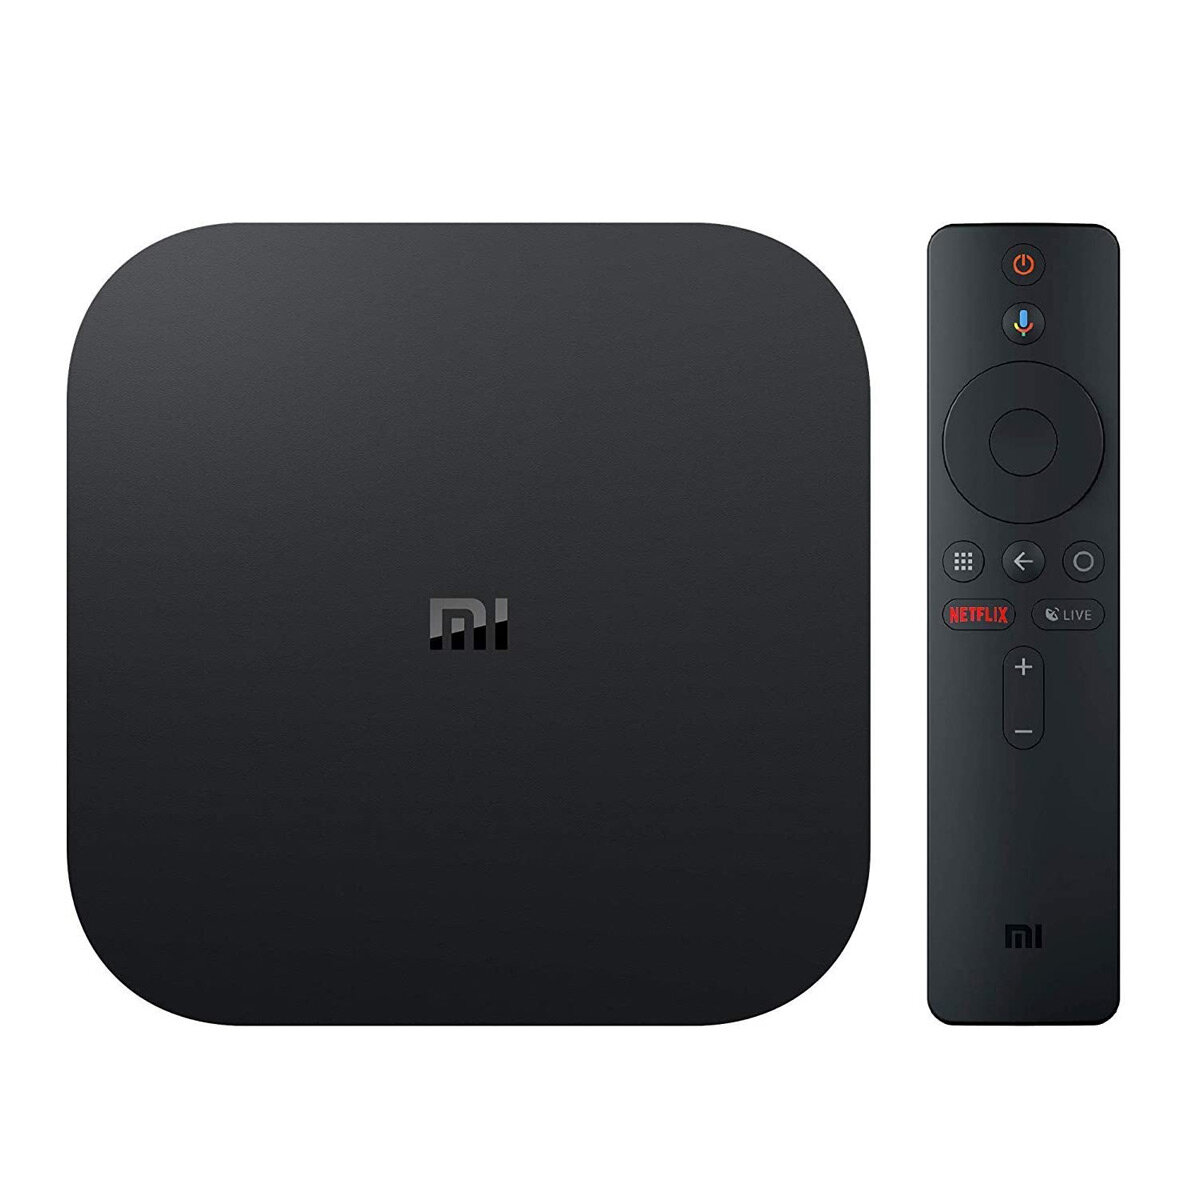 Xiaomi Mibox S 2GB DDR3 RAM 8GB ROM Android 8.1 5G WIFI bluetooth 4.2 H.265 TV Box Streaming Media Player Google Assistant Voice Control Support HD Netflix 5.1 Surround Sound Output Global Version